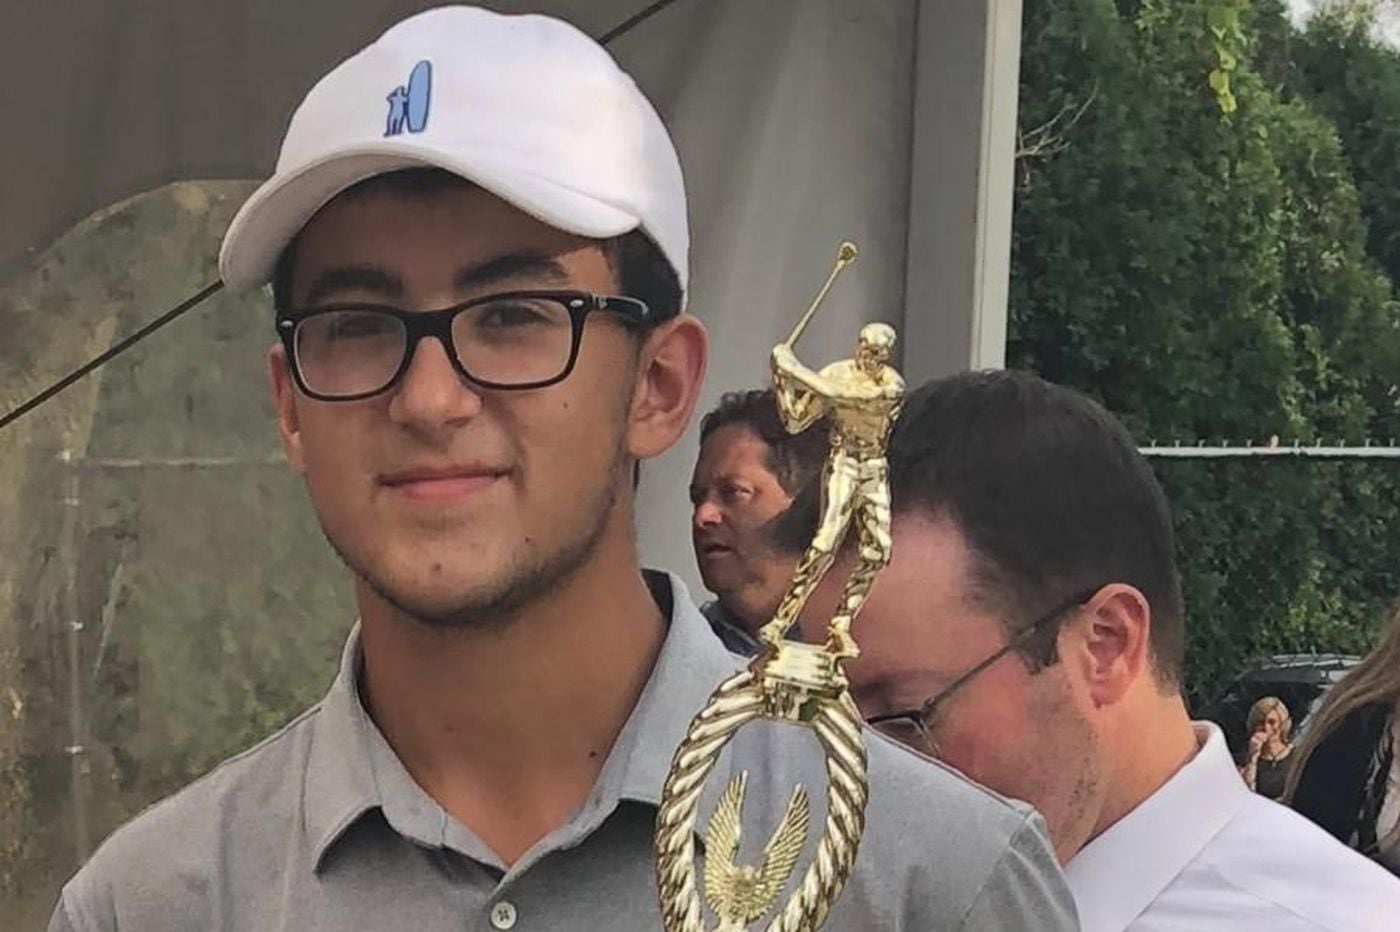 Havertown teen selected to represent the First Tee of Greater Philadelphia in Pebble Beach event